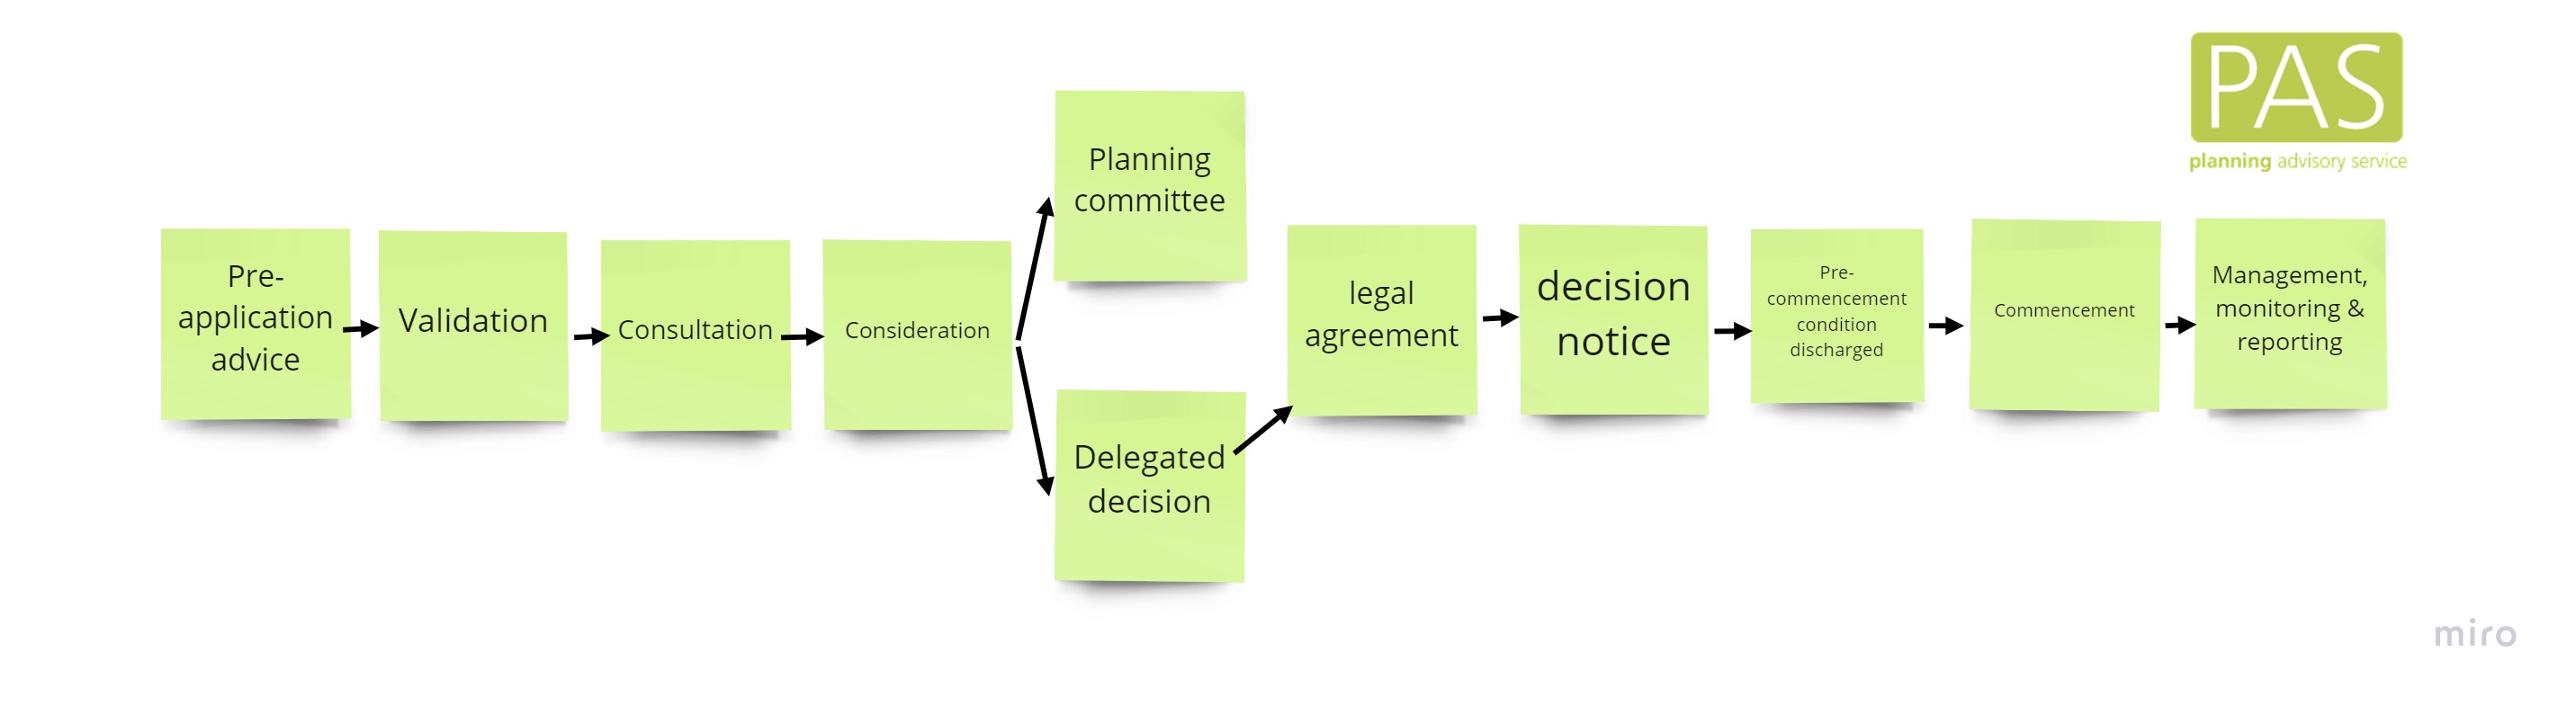 Graphic showing the standard planning application process from pre-application, through consideration to determination and post-consent monitoring